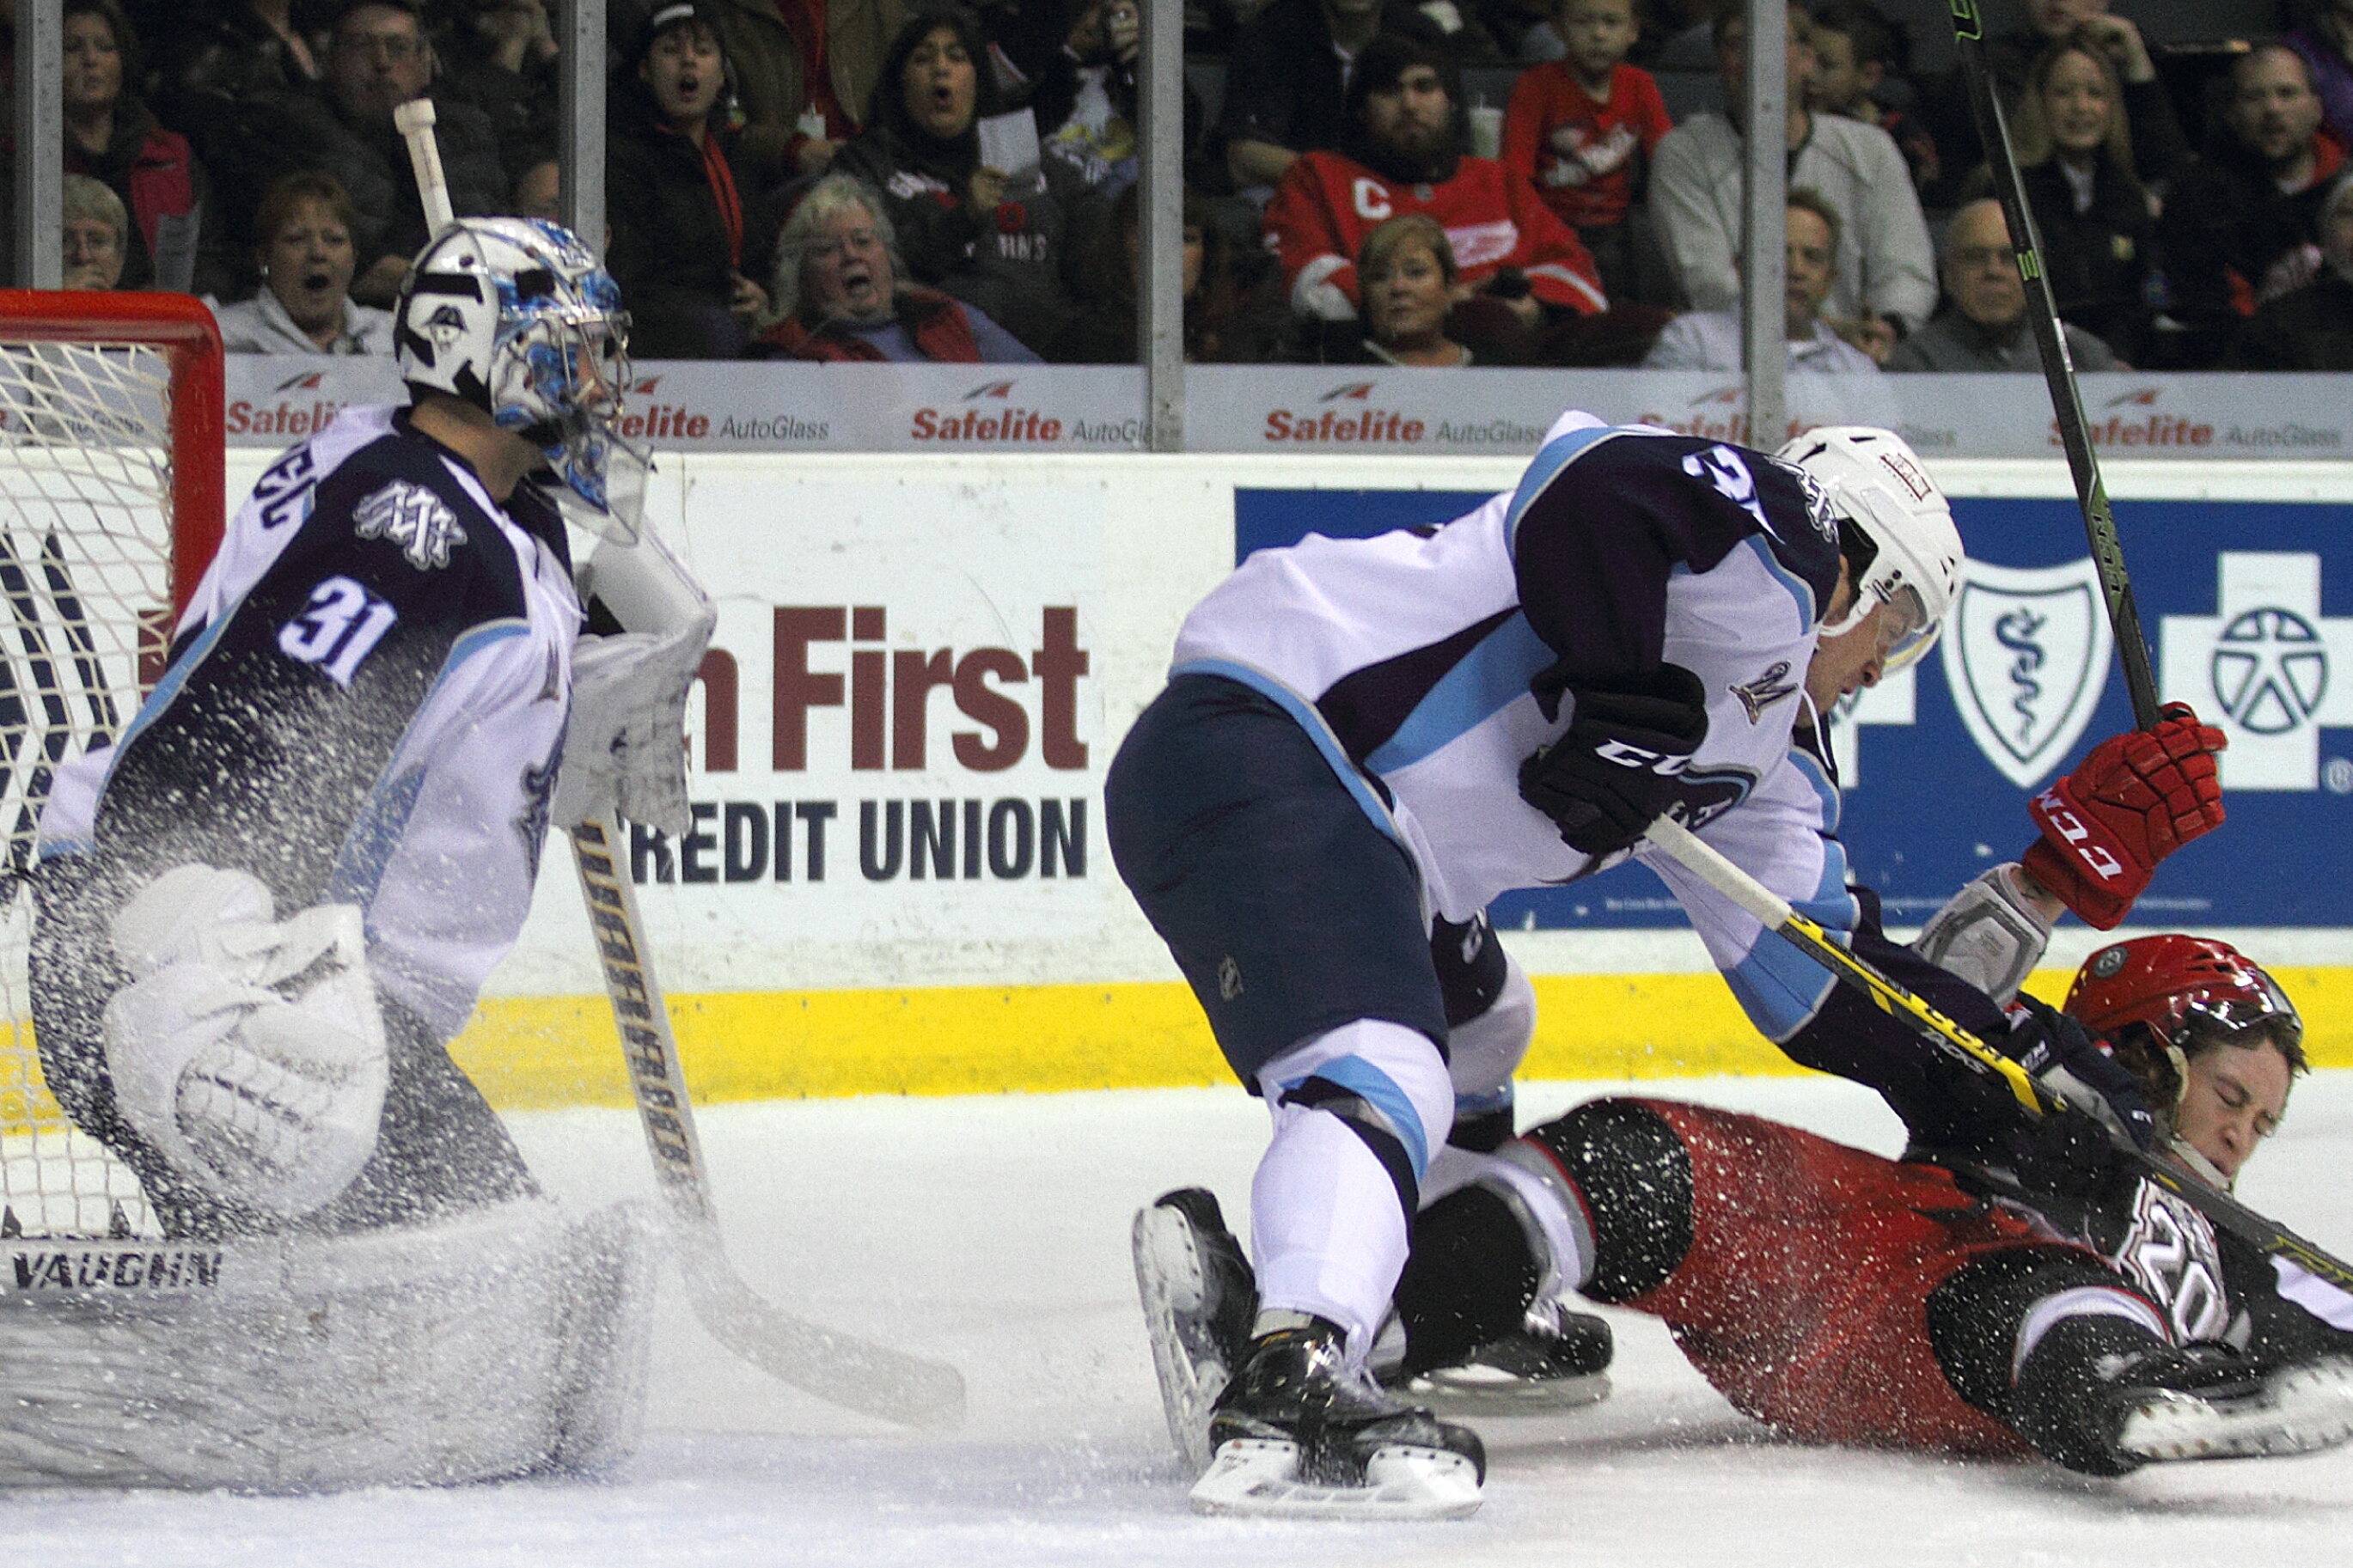 Coreau Stopped All Shots In Goal To Lead The Grand Rapids Griffins